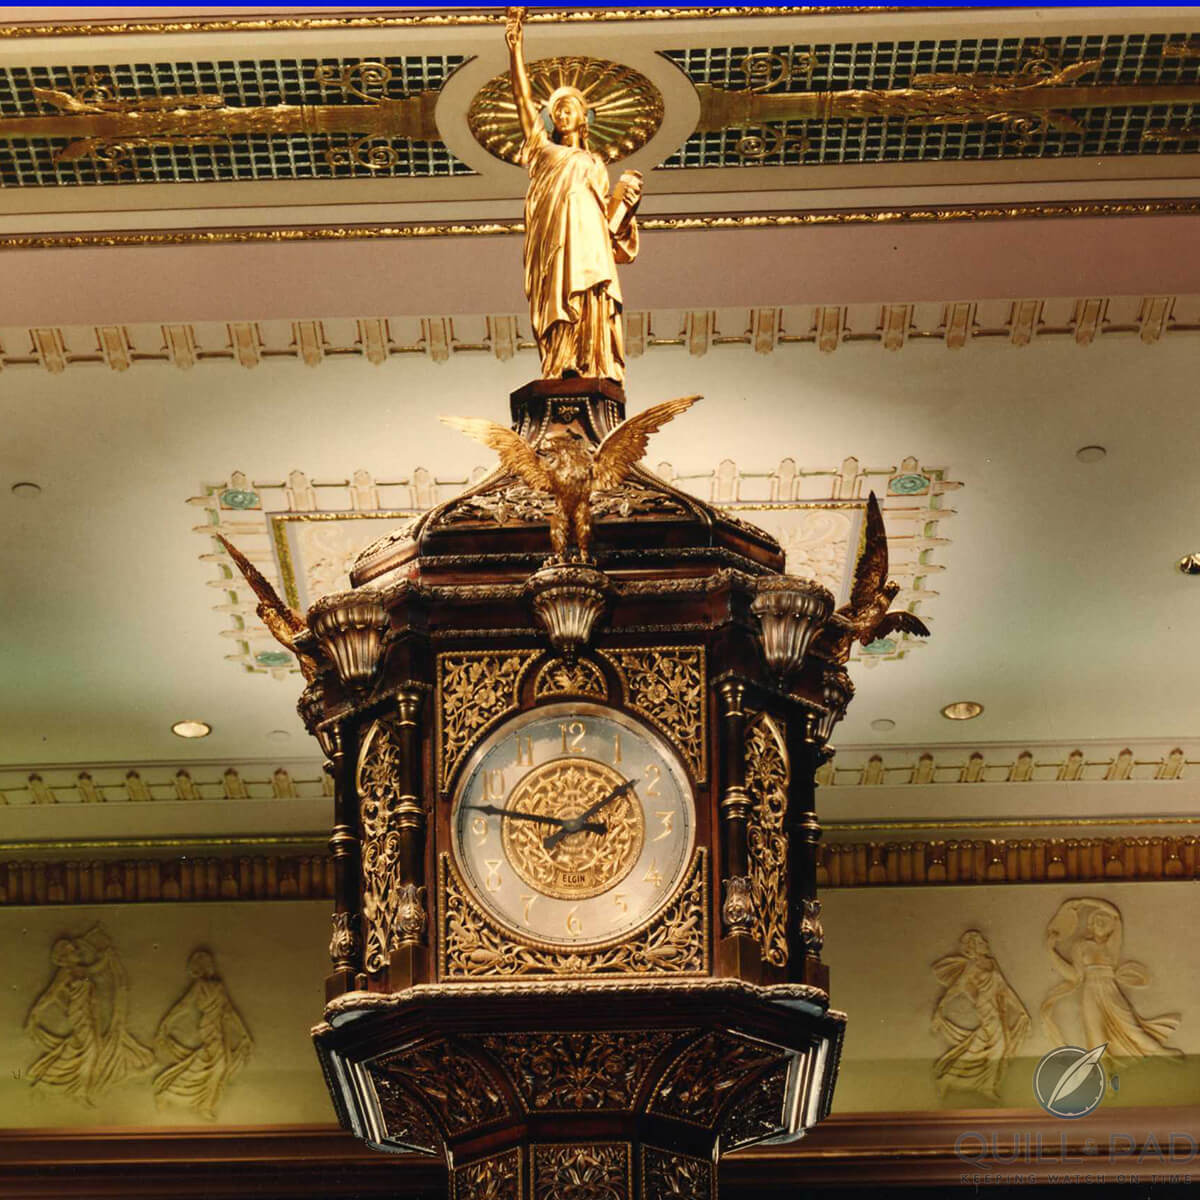 Statue of Lady Liberty on top of the clock in the lobby of the Waldorf Astoria hotel in New York